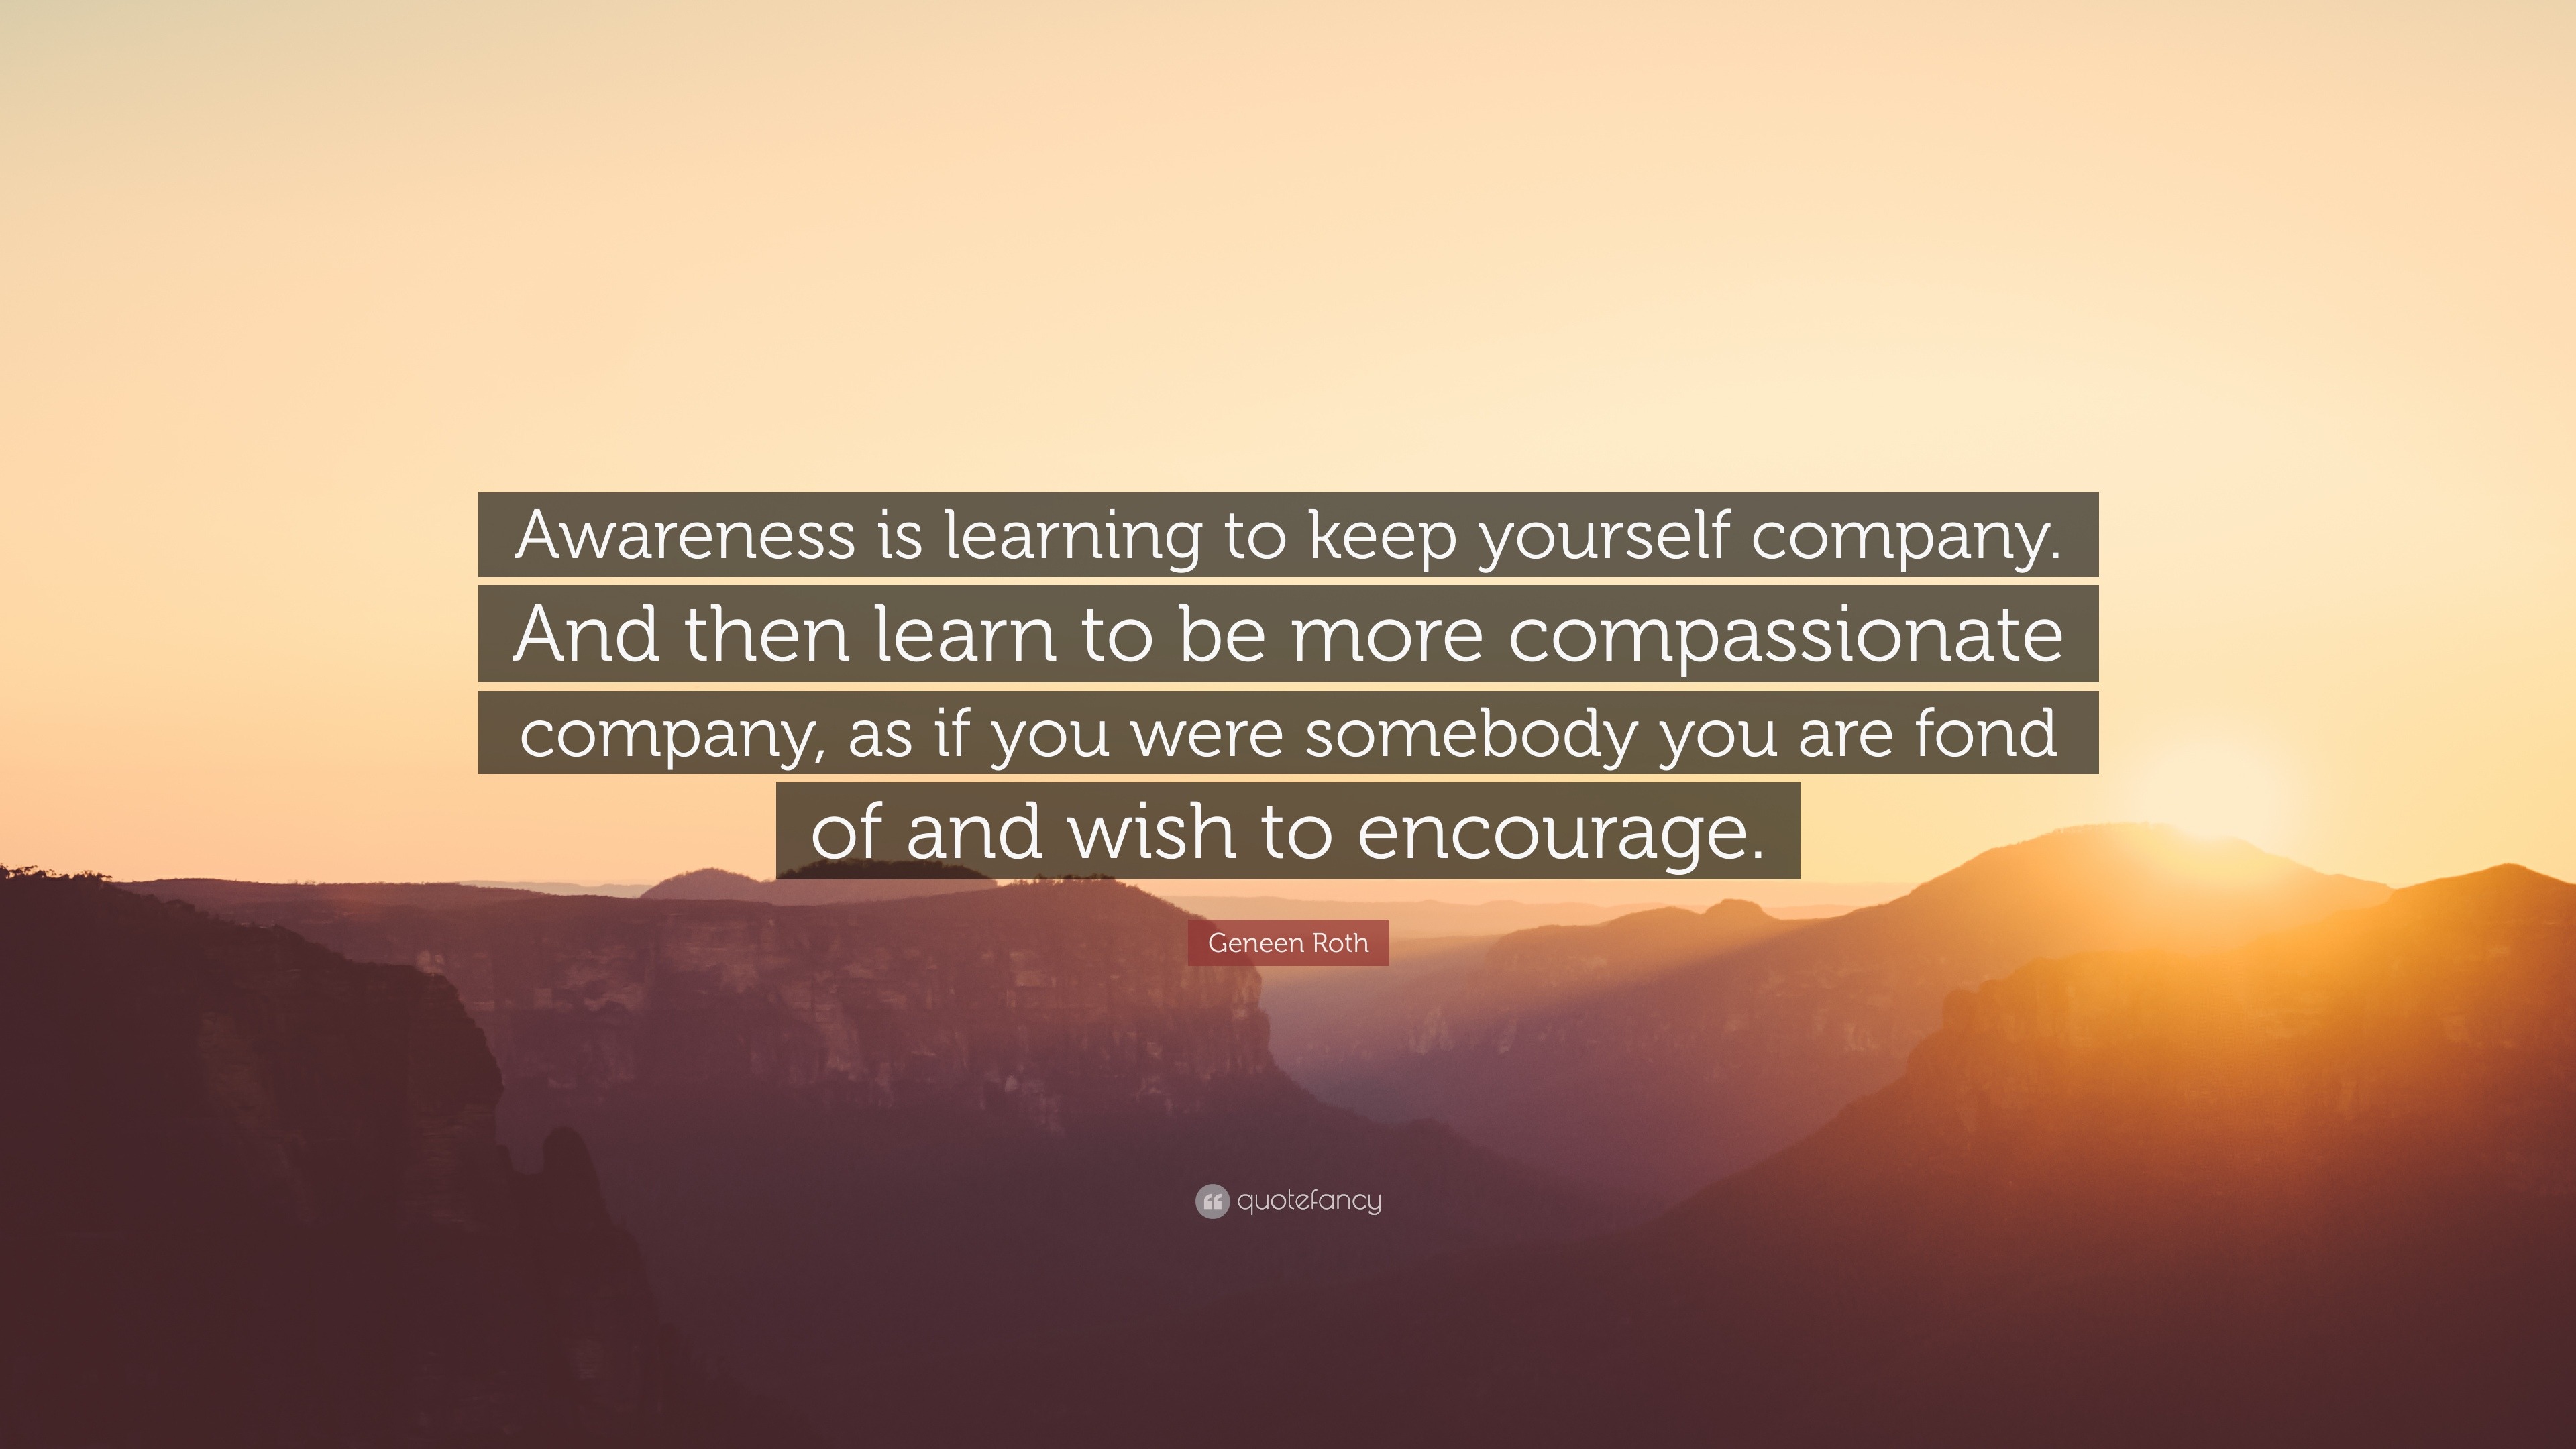 Geneen Roth Quote: “Awareness is learning to keep yourself company. And ...